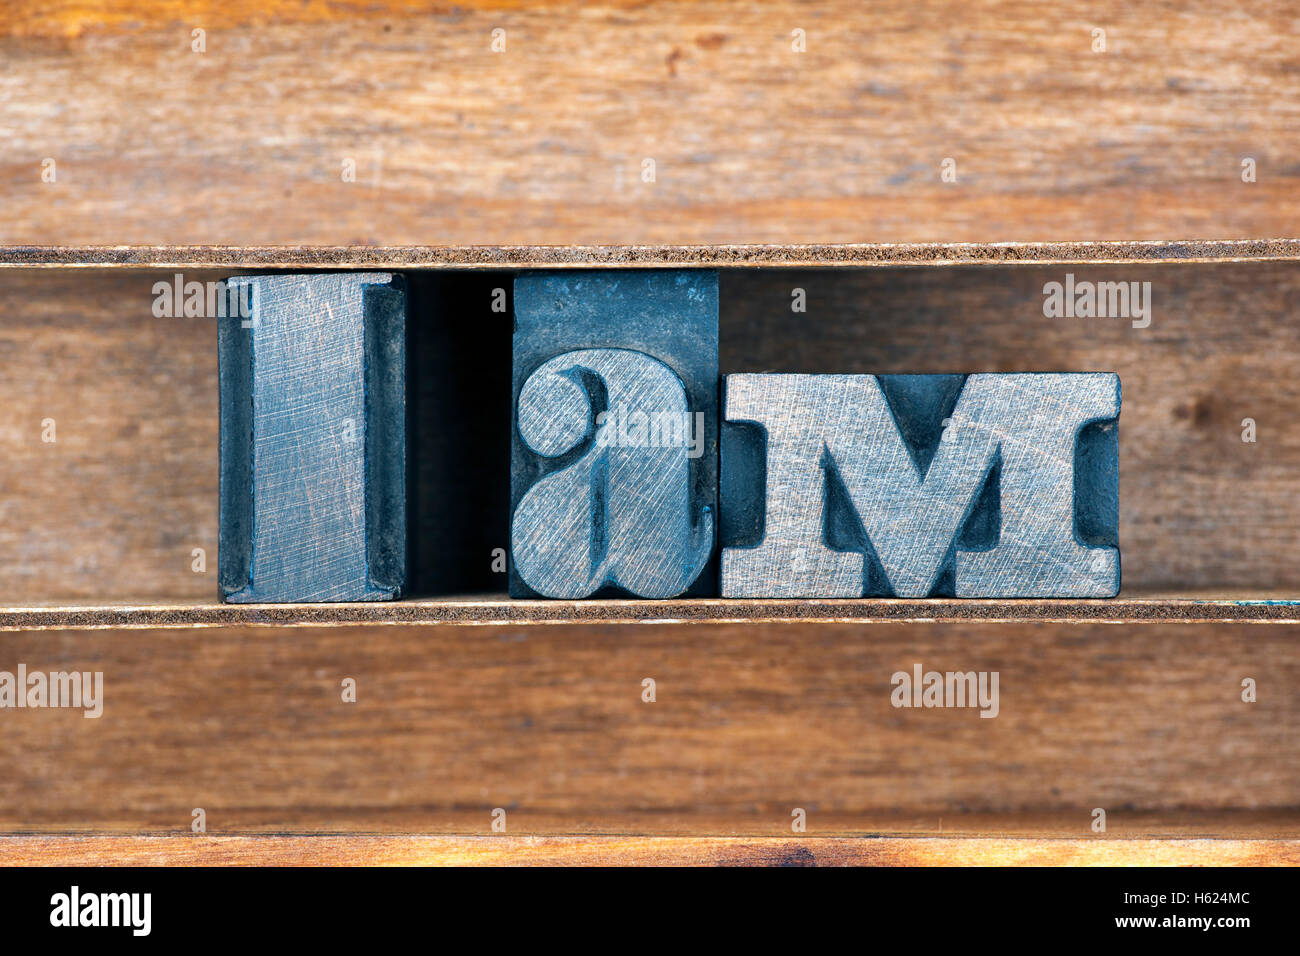 I am phrase made from vintage letterpress type on wooden tray Stock Photo